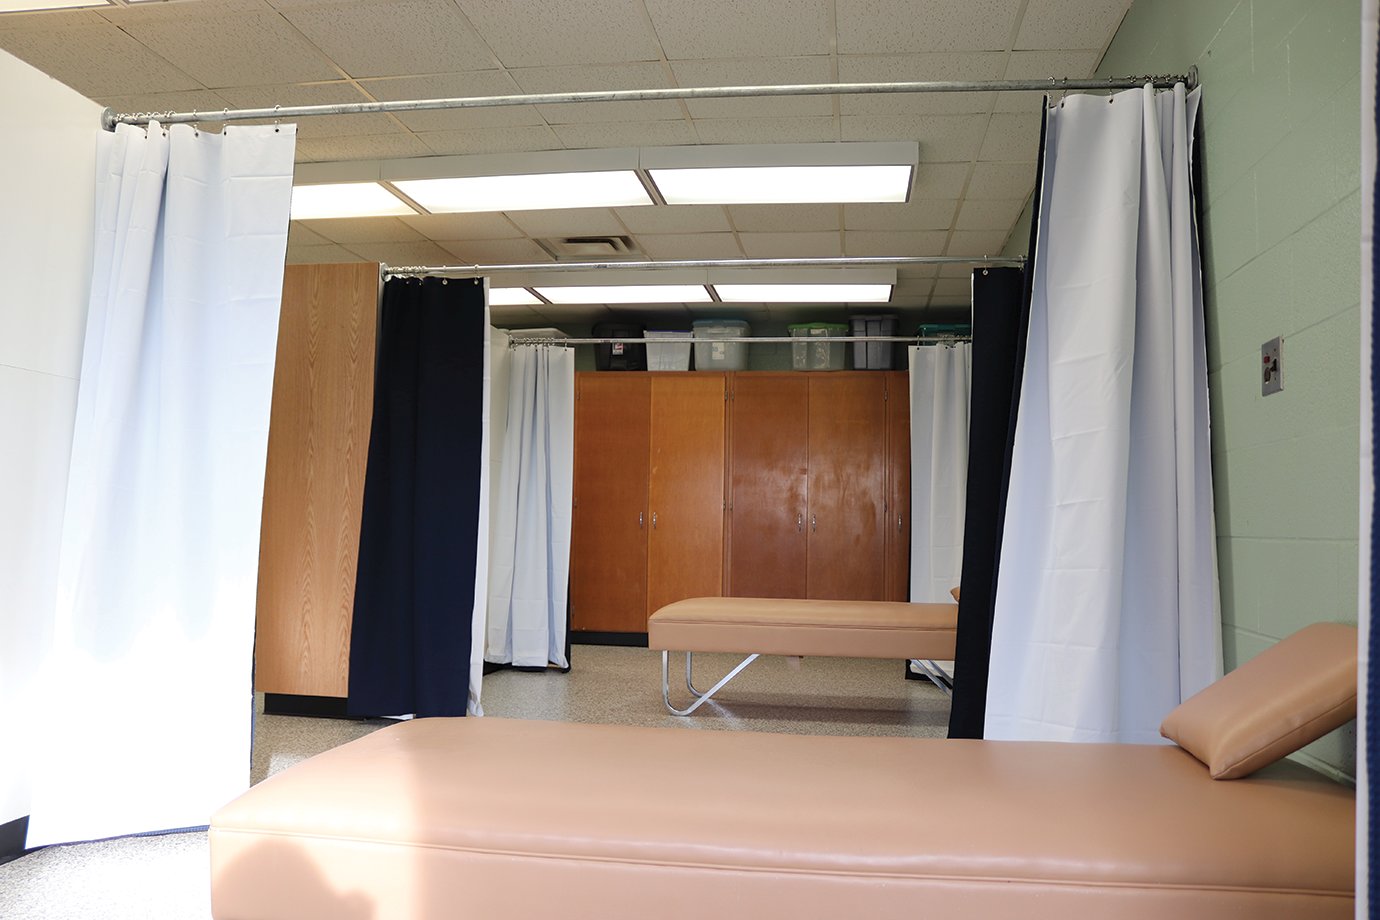 Two beds designated for treating and quaratining students who test positive for COVID-19 at Fountain Central have been created for the 2020-21 school year, which began Wednesday.